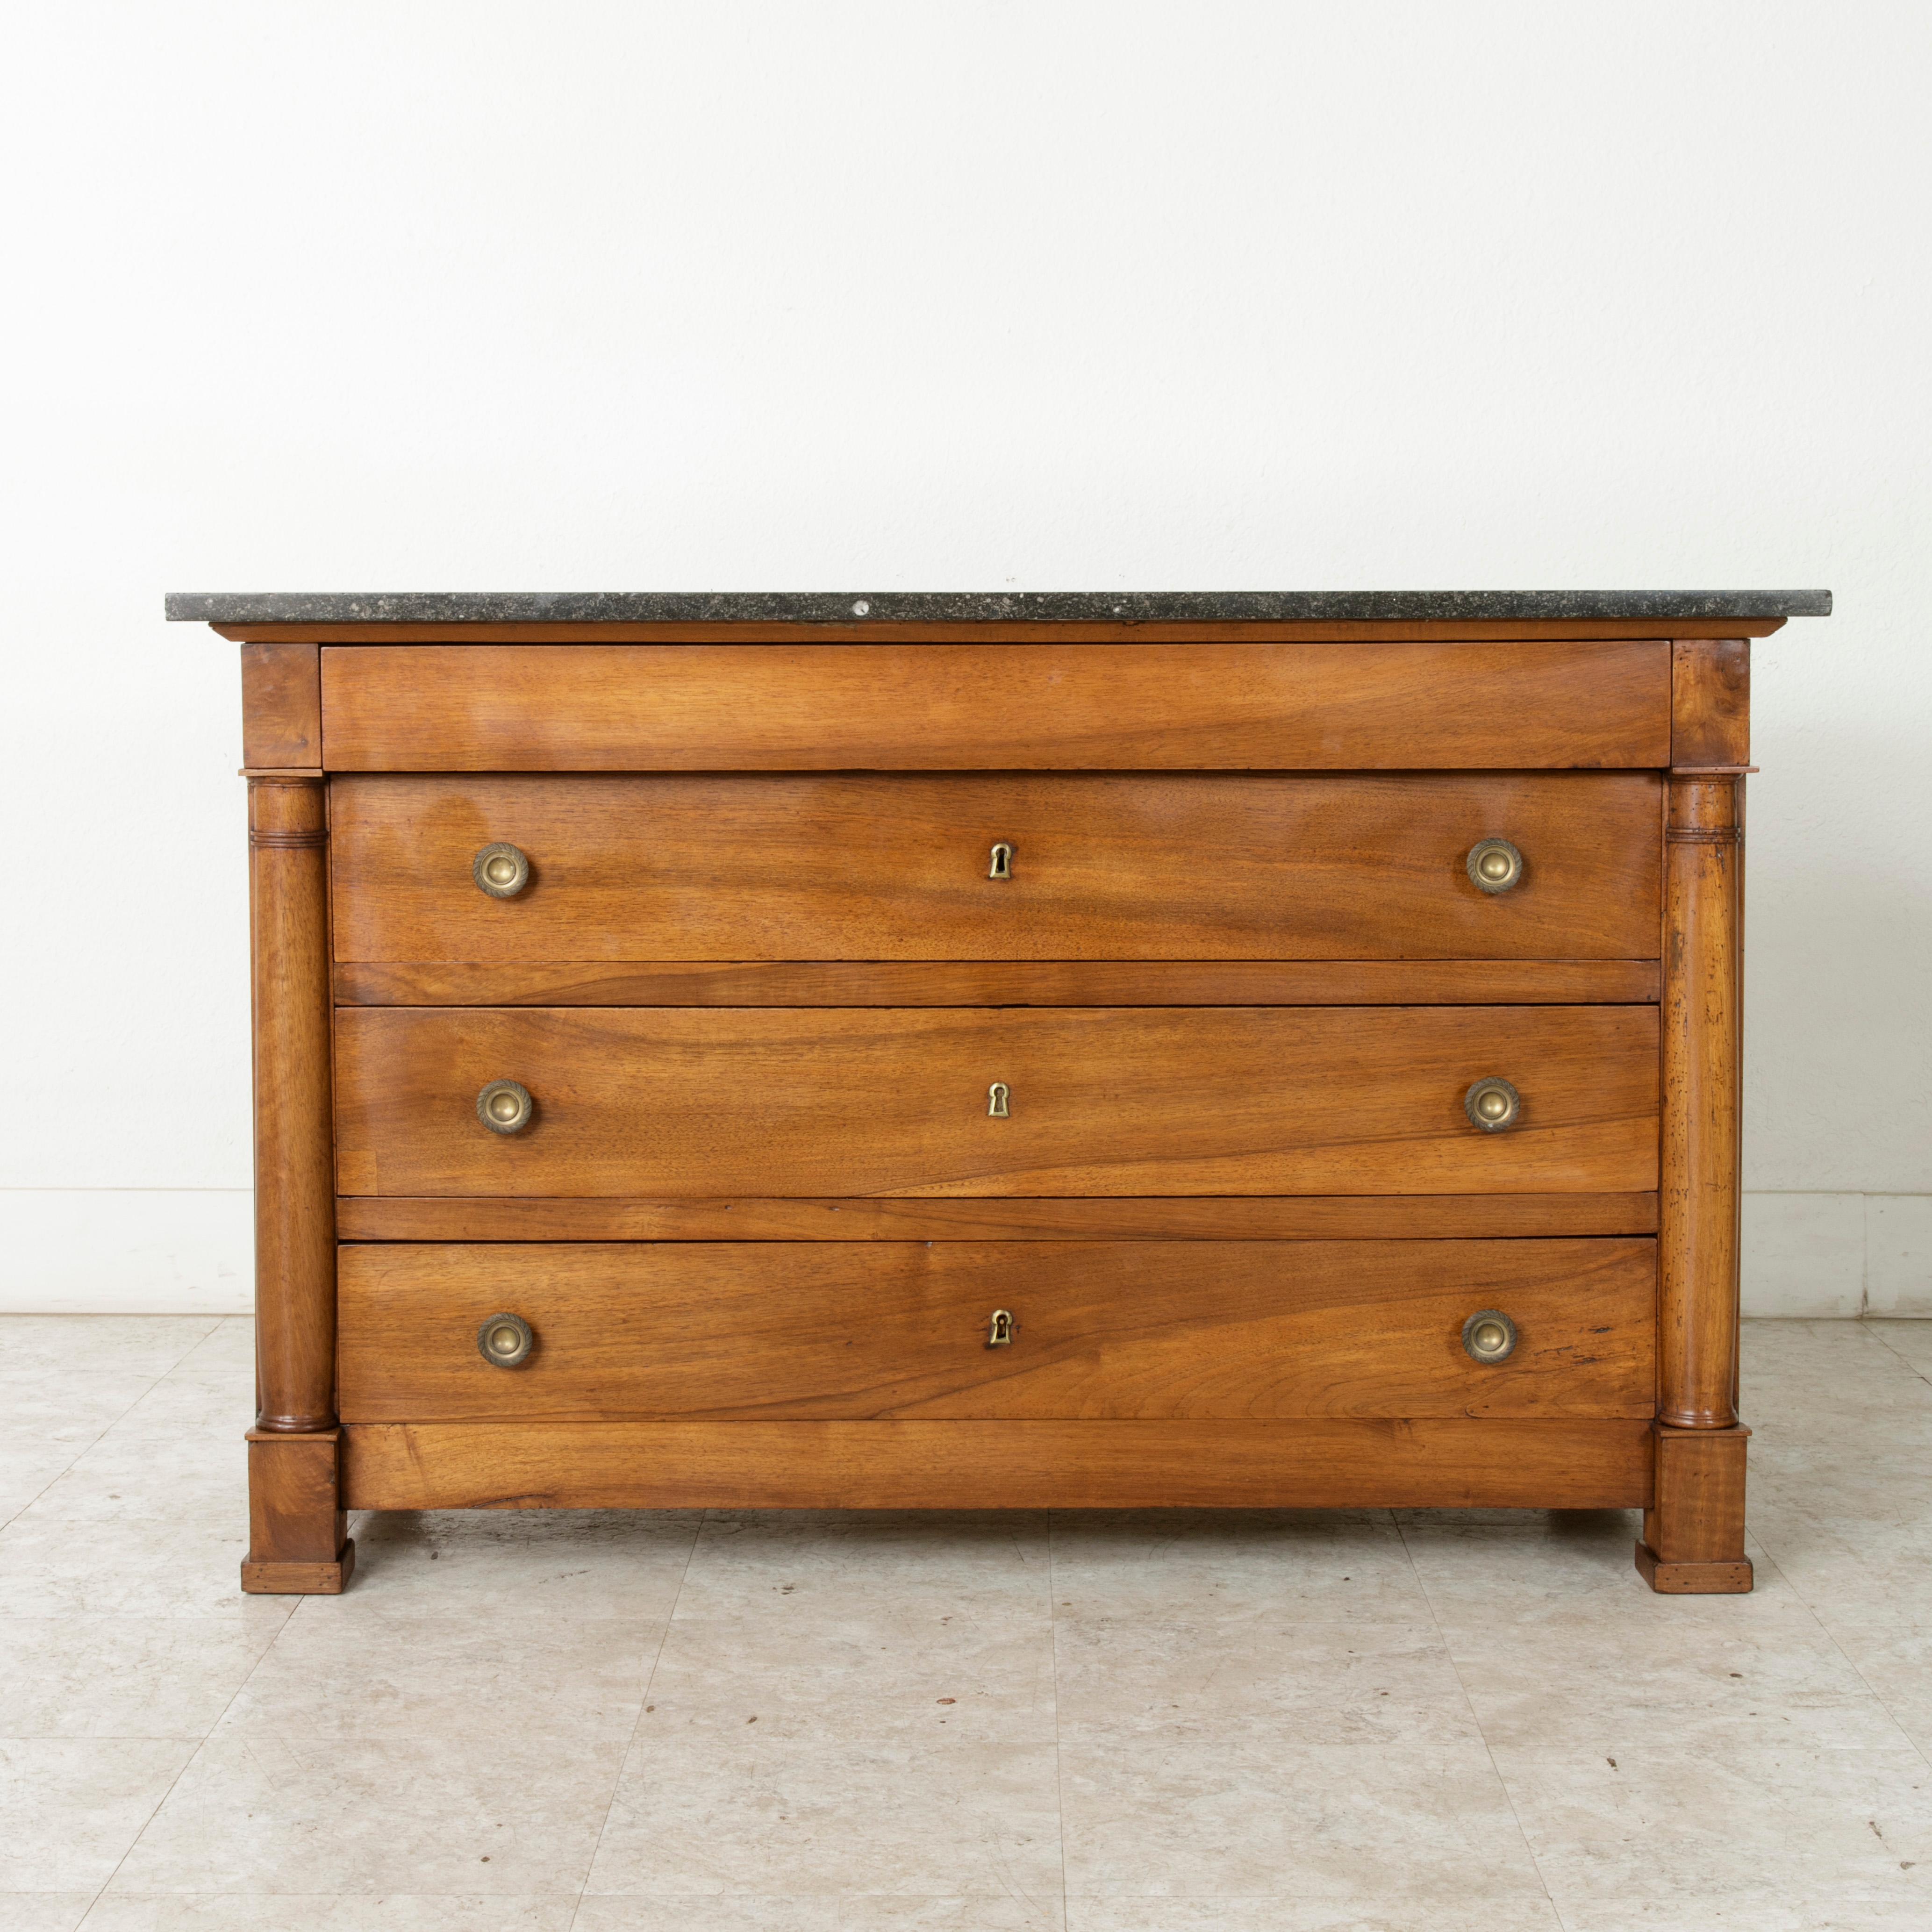 Late 19th Century French Empire Style Walnut Commode or Chest with Black Marble (Französisch)